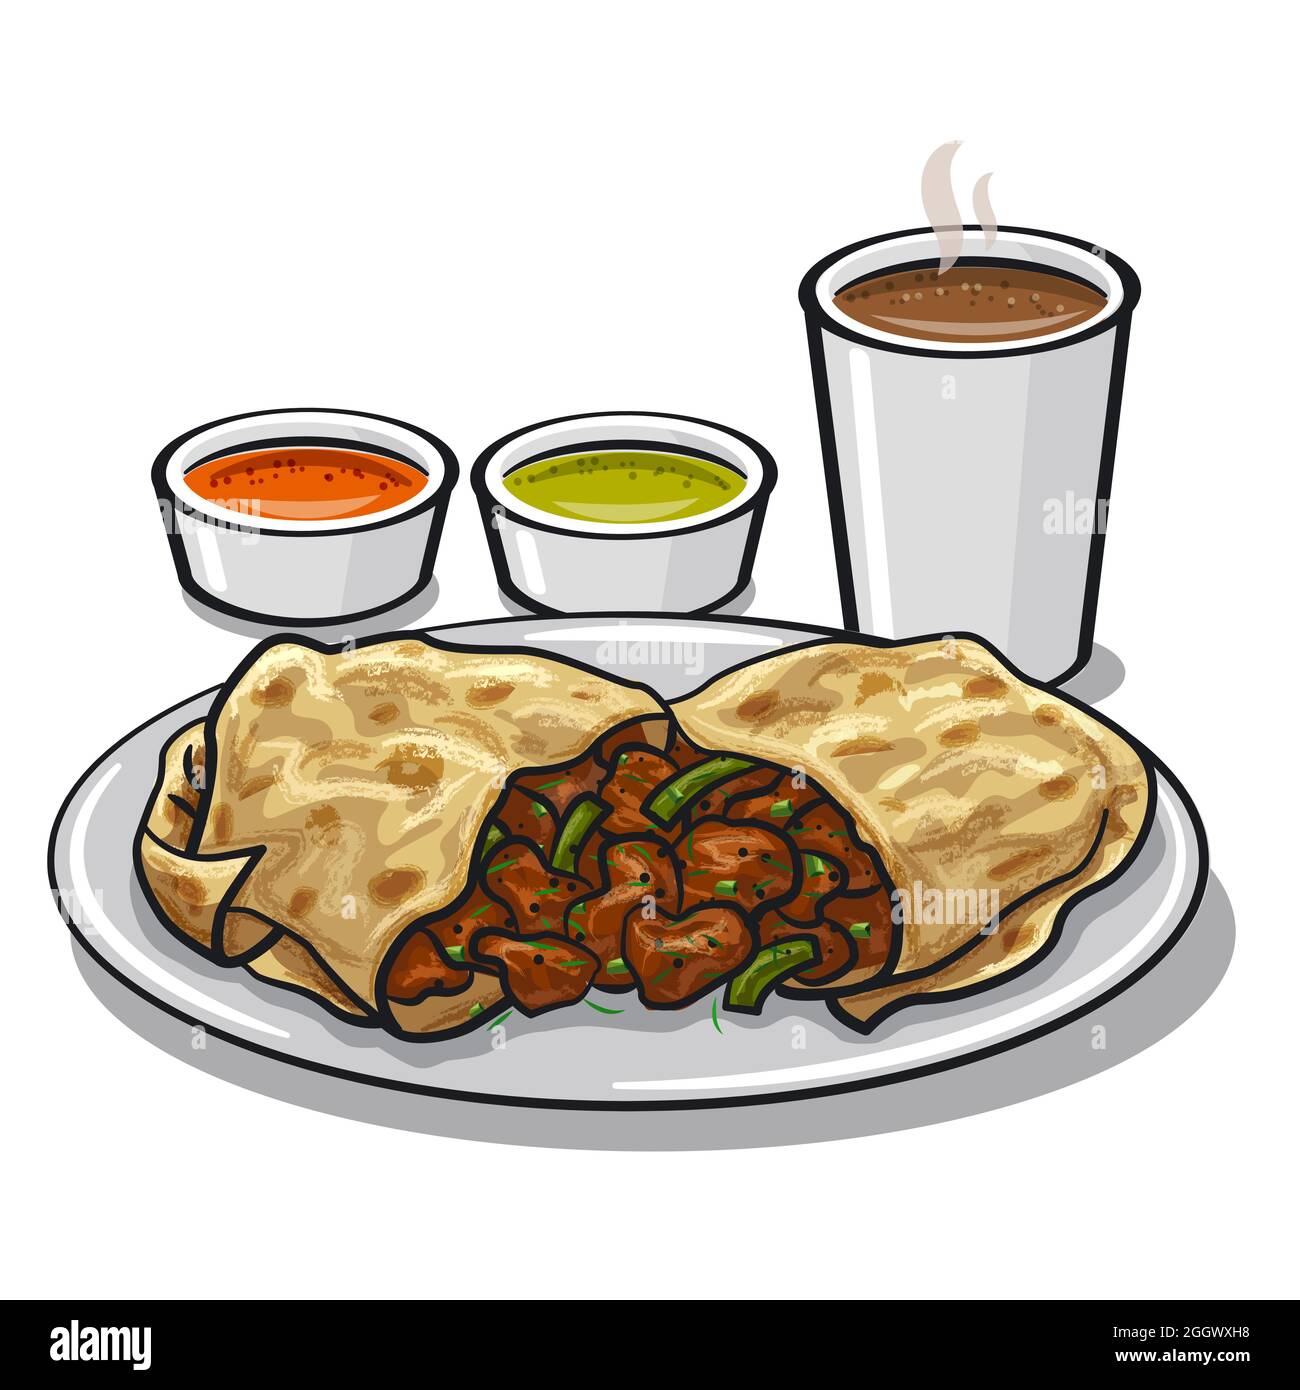 Illustration of the mexican corne asado burito on the plate with sauces  and coffee Stock Vector